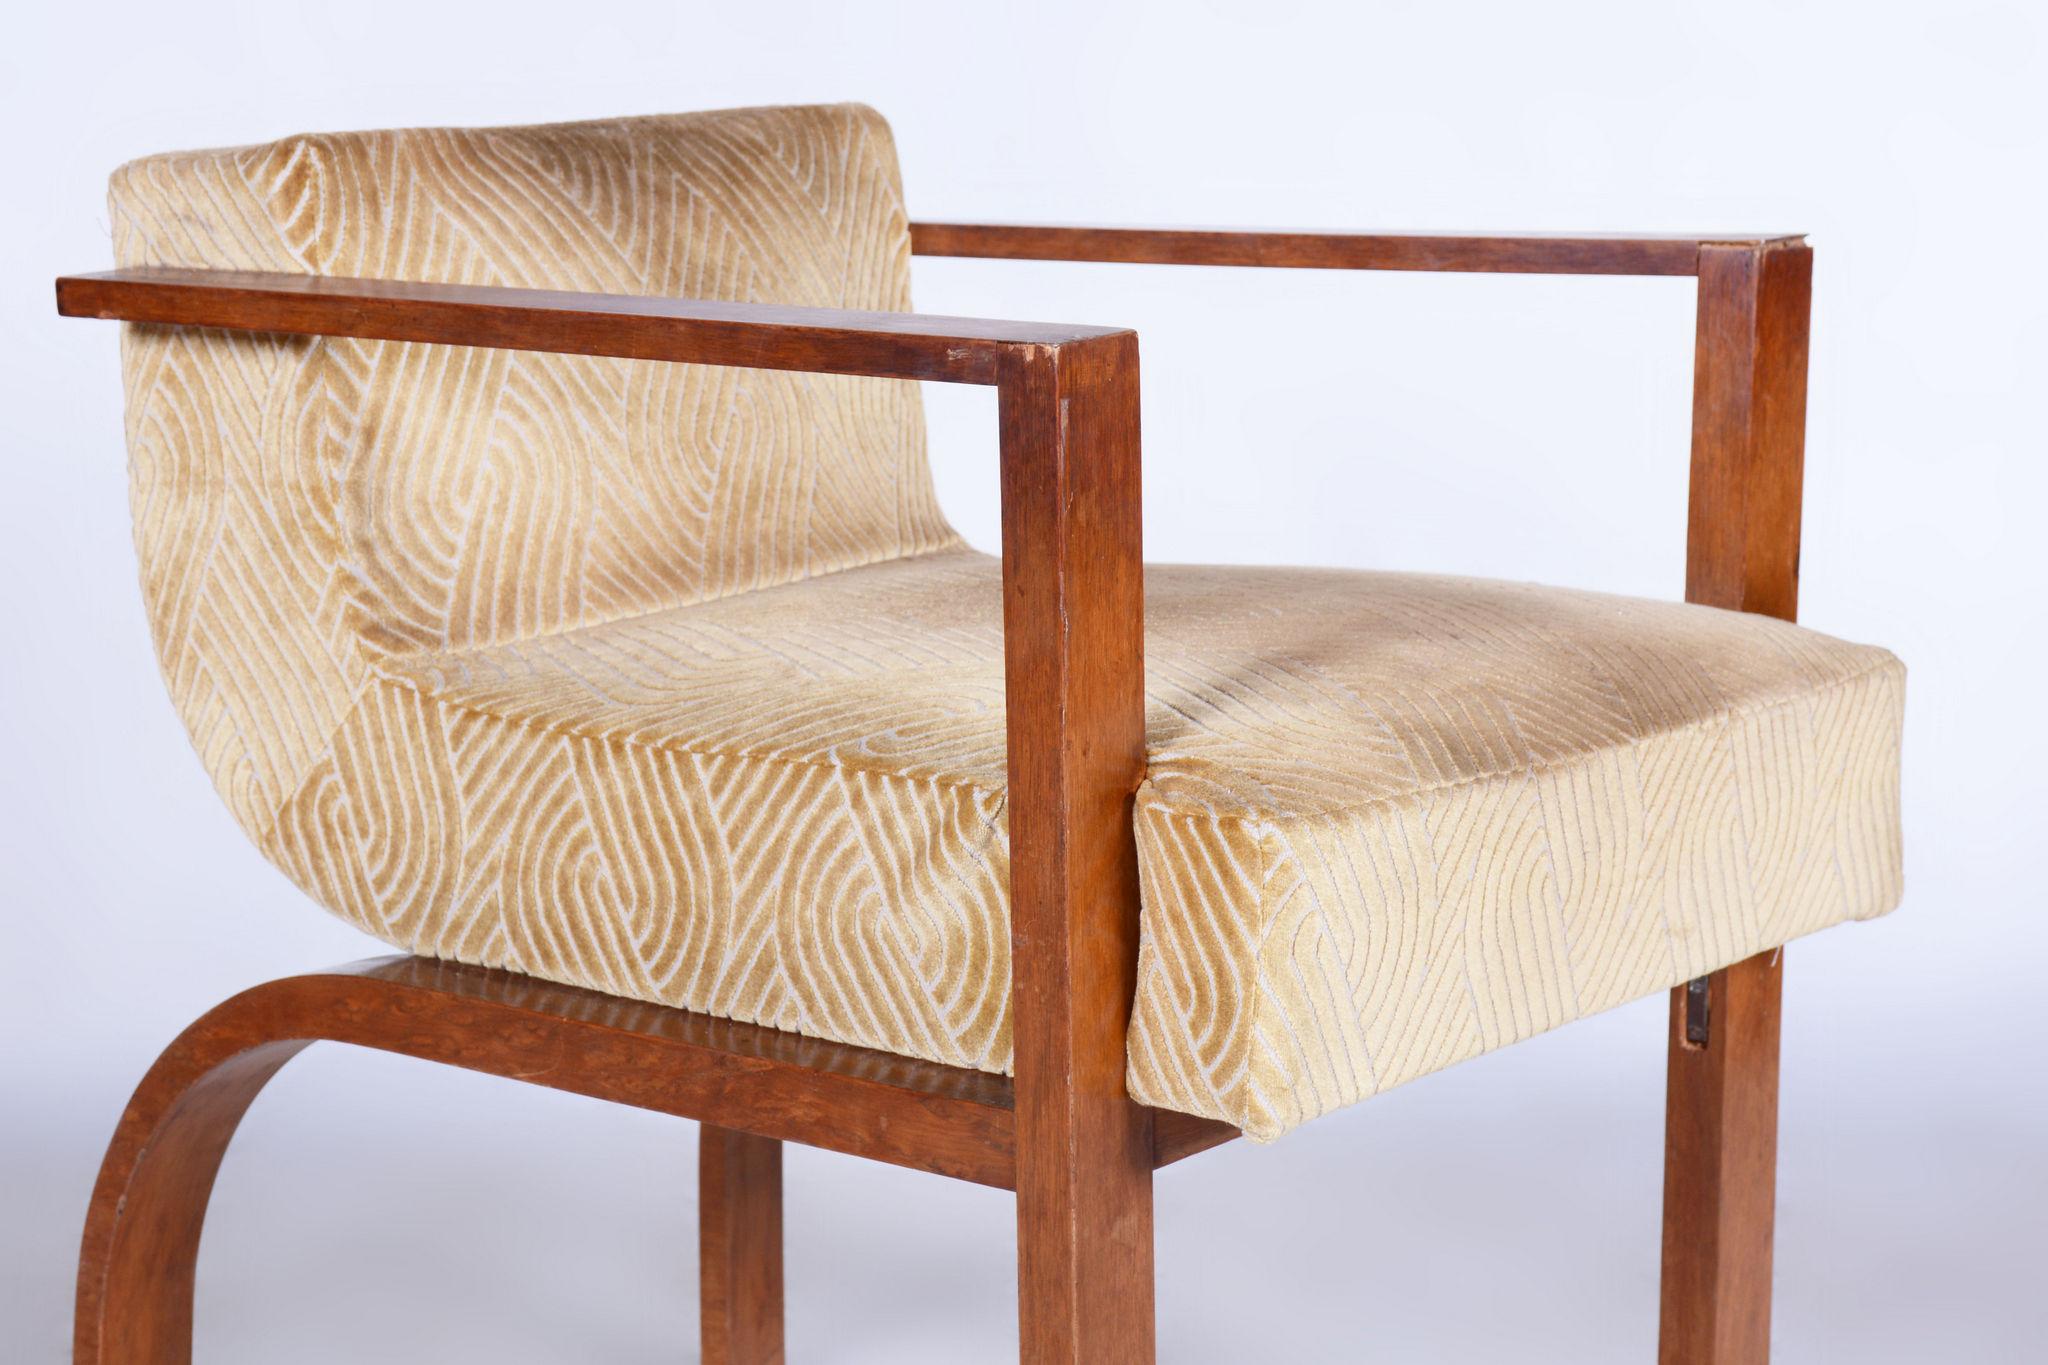 Palisander Seating Set with Coffee Table, Art Deco, Restored, France, 1920s For Sale 3